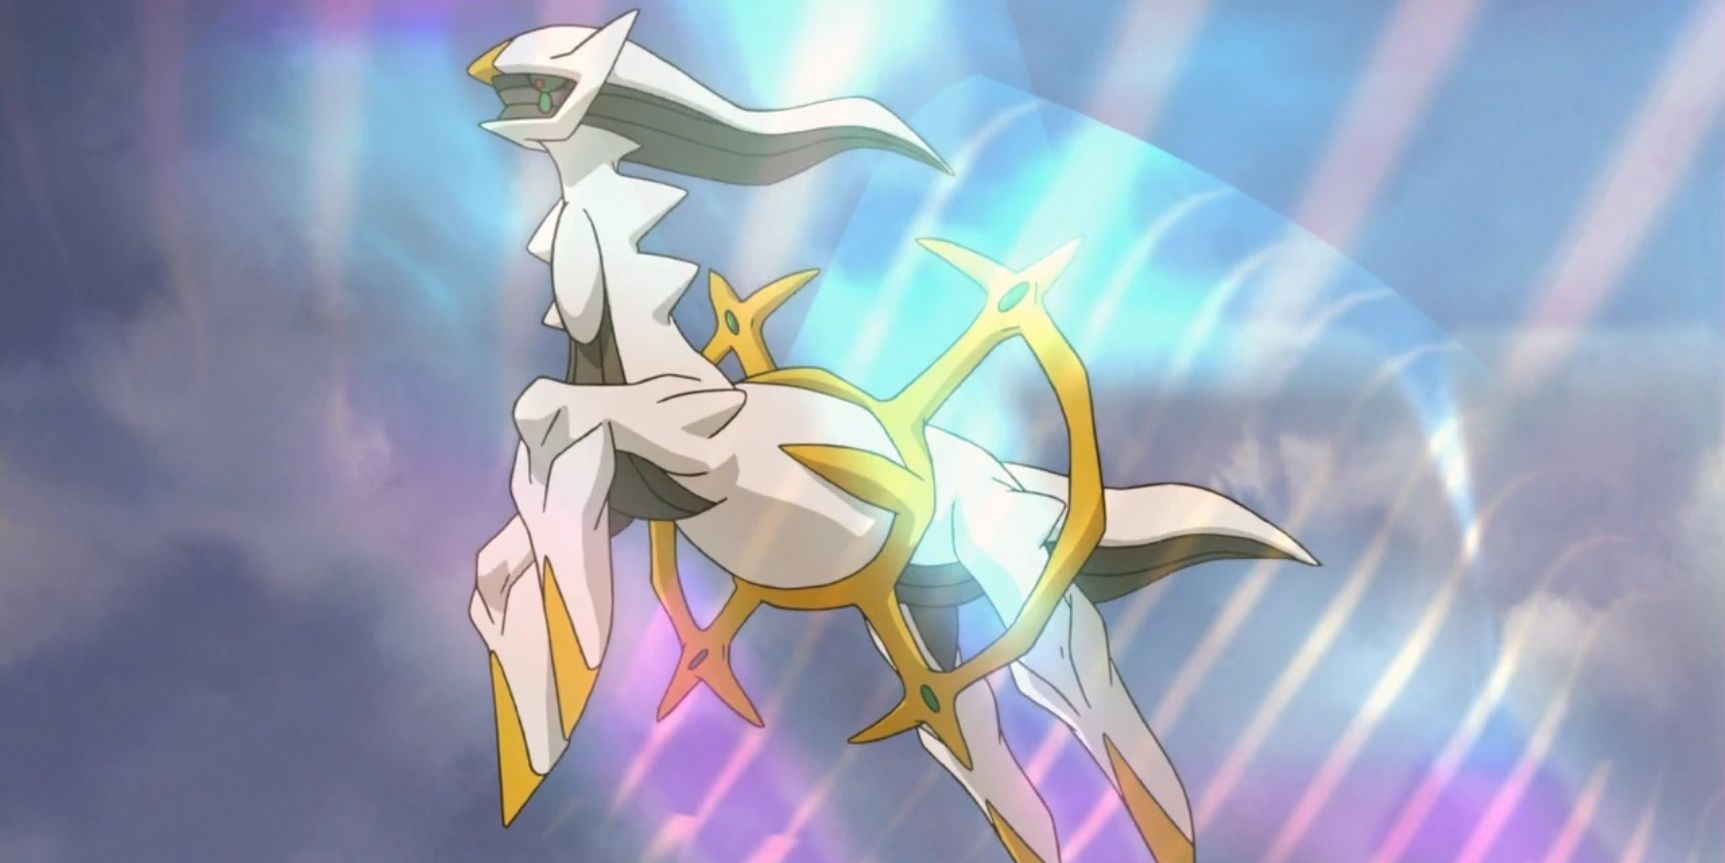 10 Times A Pokémon Was Saved From Death In The Anime